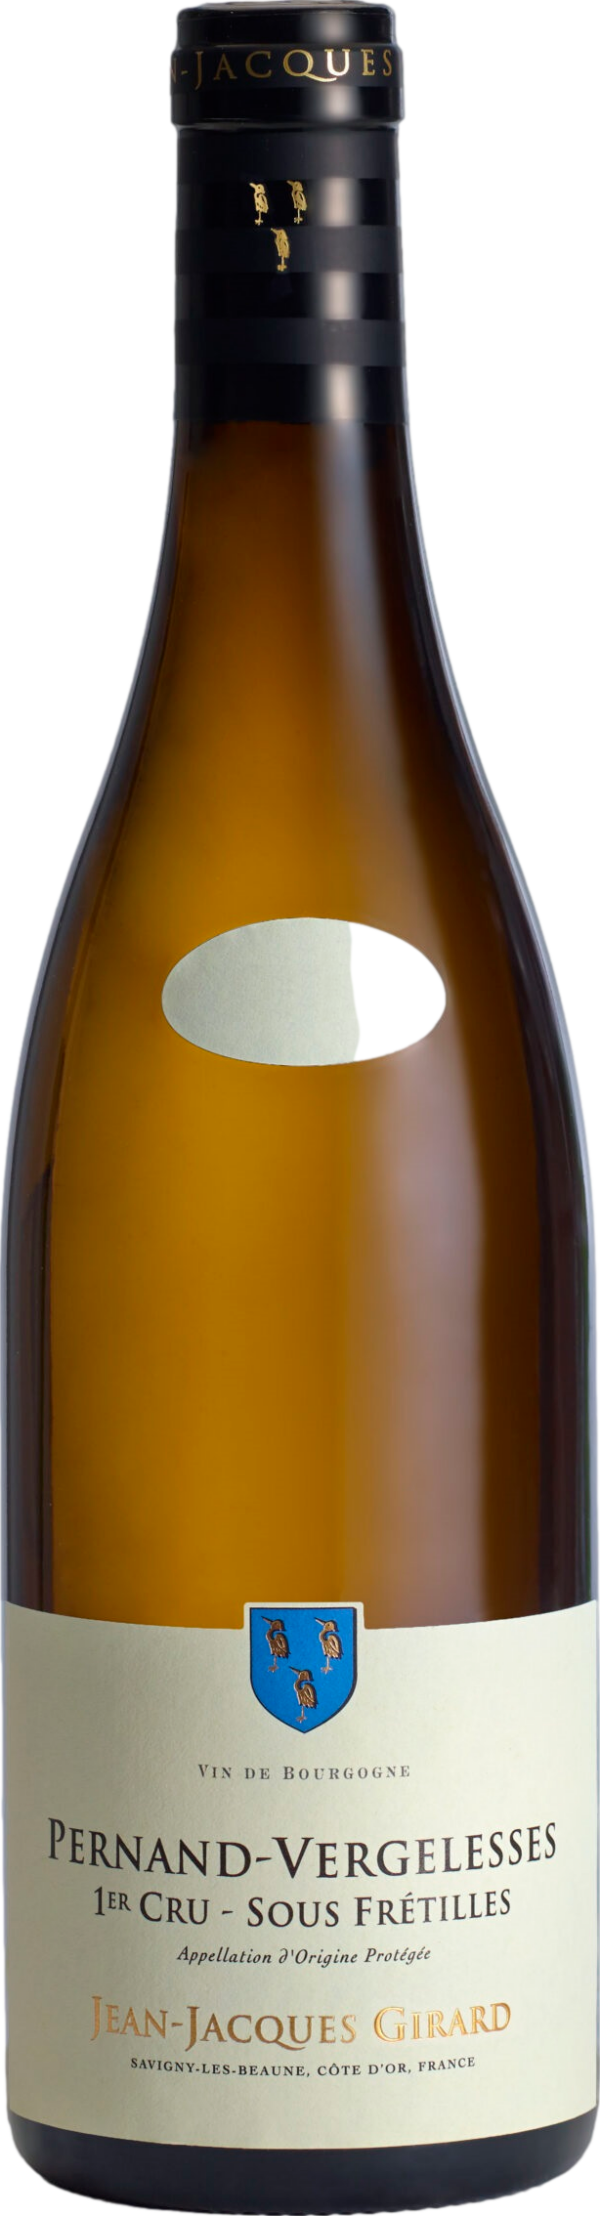 Product image of Domaine Jean-Jacques Girard Pernand-Vergelesses Premier Cru Sous Fretille 2022 from 8wines